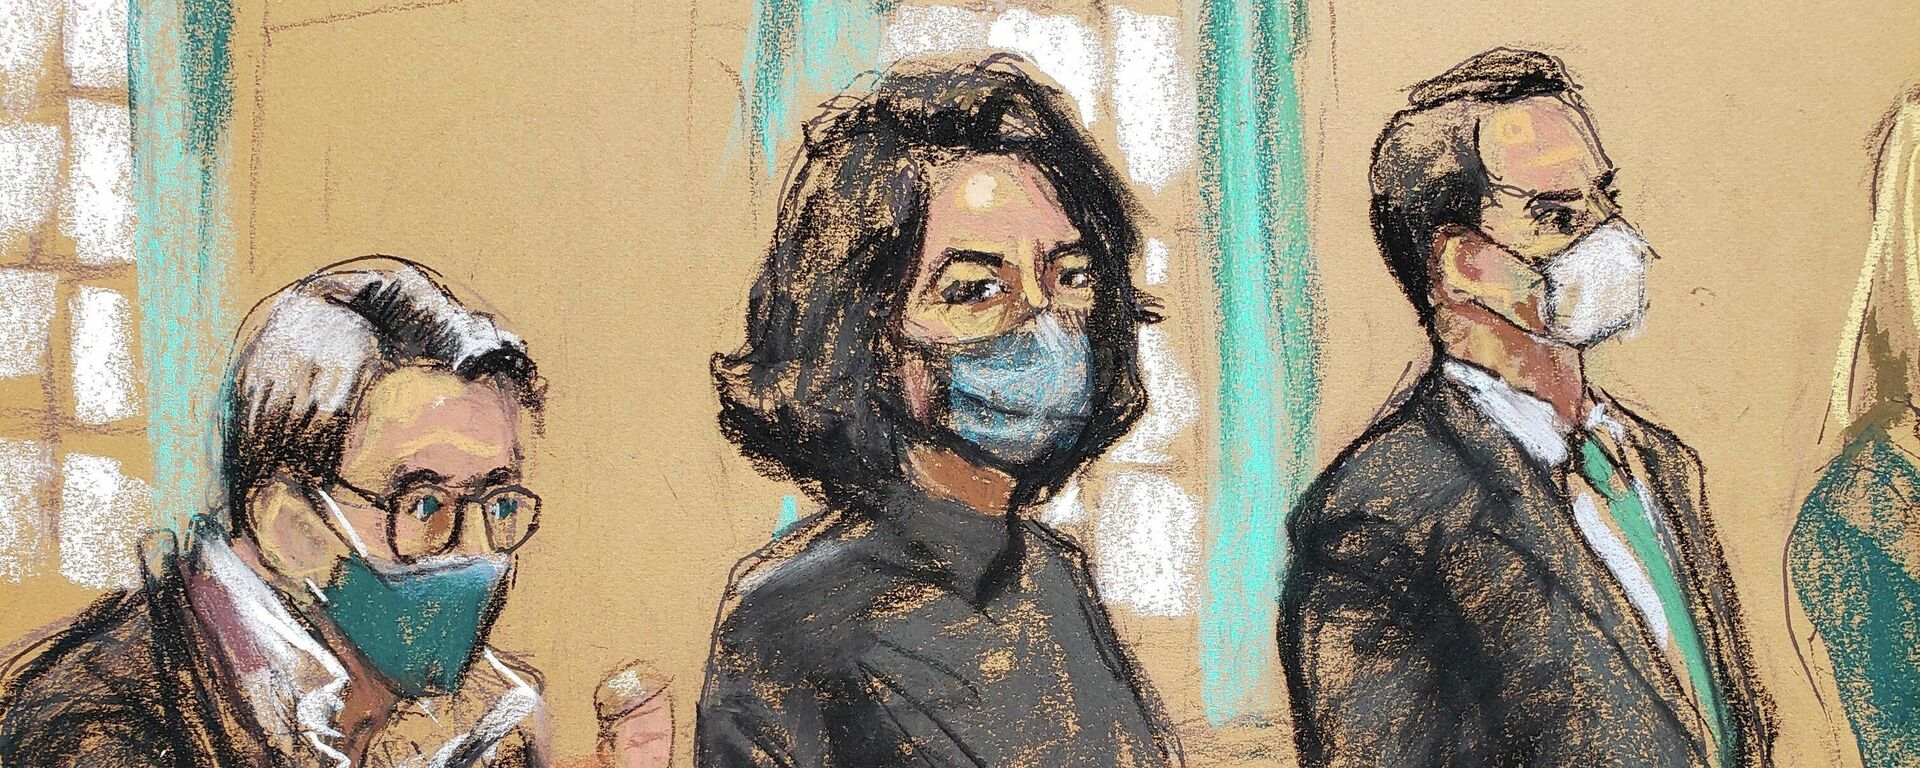 Ghislaine Maxwell, the Jeffrey Epstein associate accused of sex trafficking, stands before U.S. District Judge Alison J. Nathan with her defense team of Bobbi Sternheim and Christian Everdell during a pre-trial hearing ahead of jury selection, in a courtroom sketch in New York City, U.S., November 15, 2021 - Sputnik International, 1920, 21.11.2021